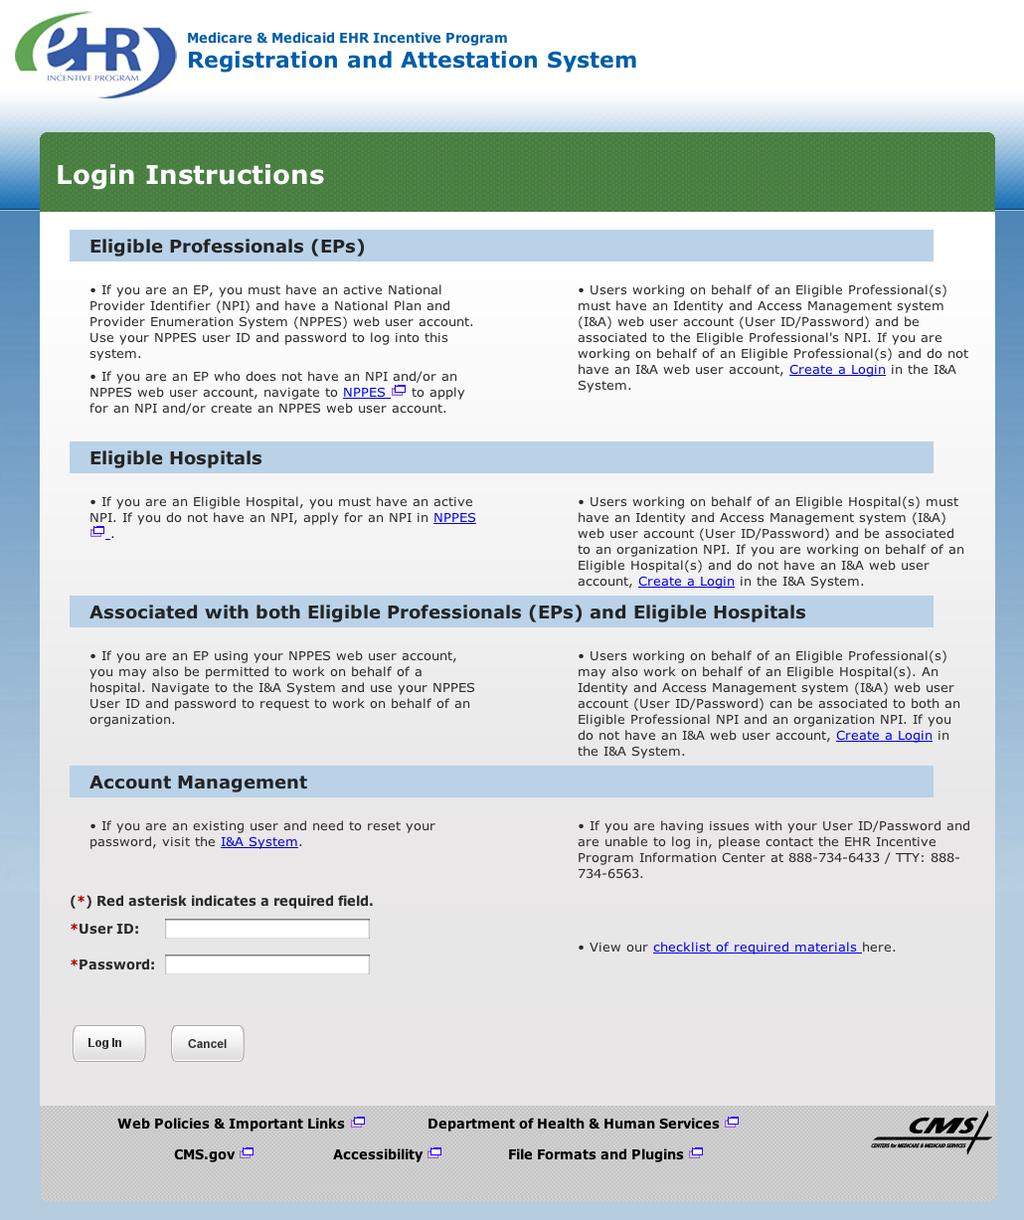 Step 2 Login Review the Login Instructions for Eligible Professionals.